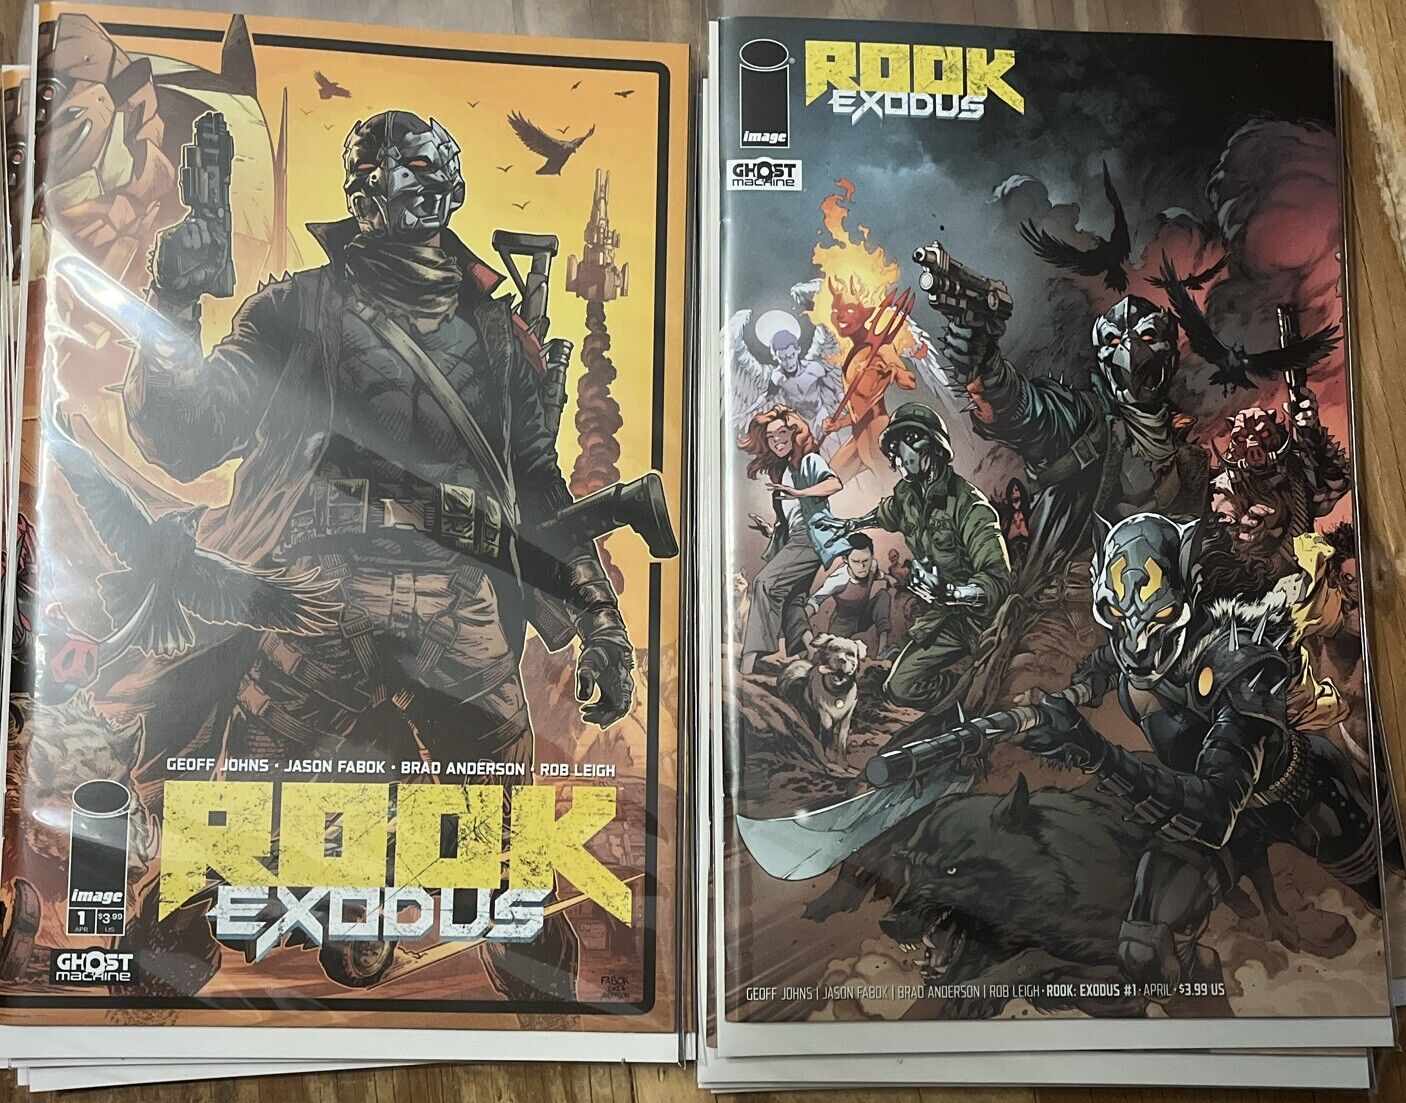 ROOK EXODUS #1 MAIN JASON FABOK COVER A And B Set Of 2- Ghost Machine NM